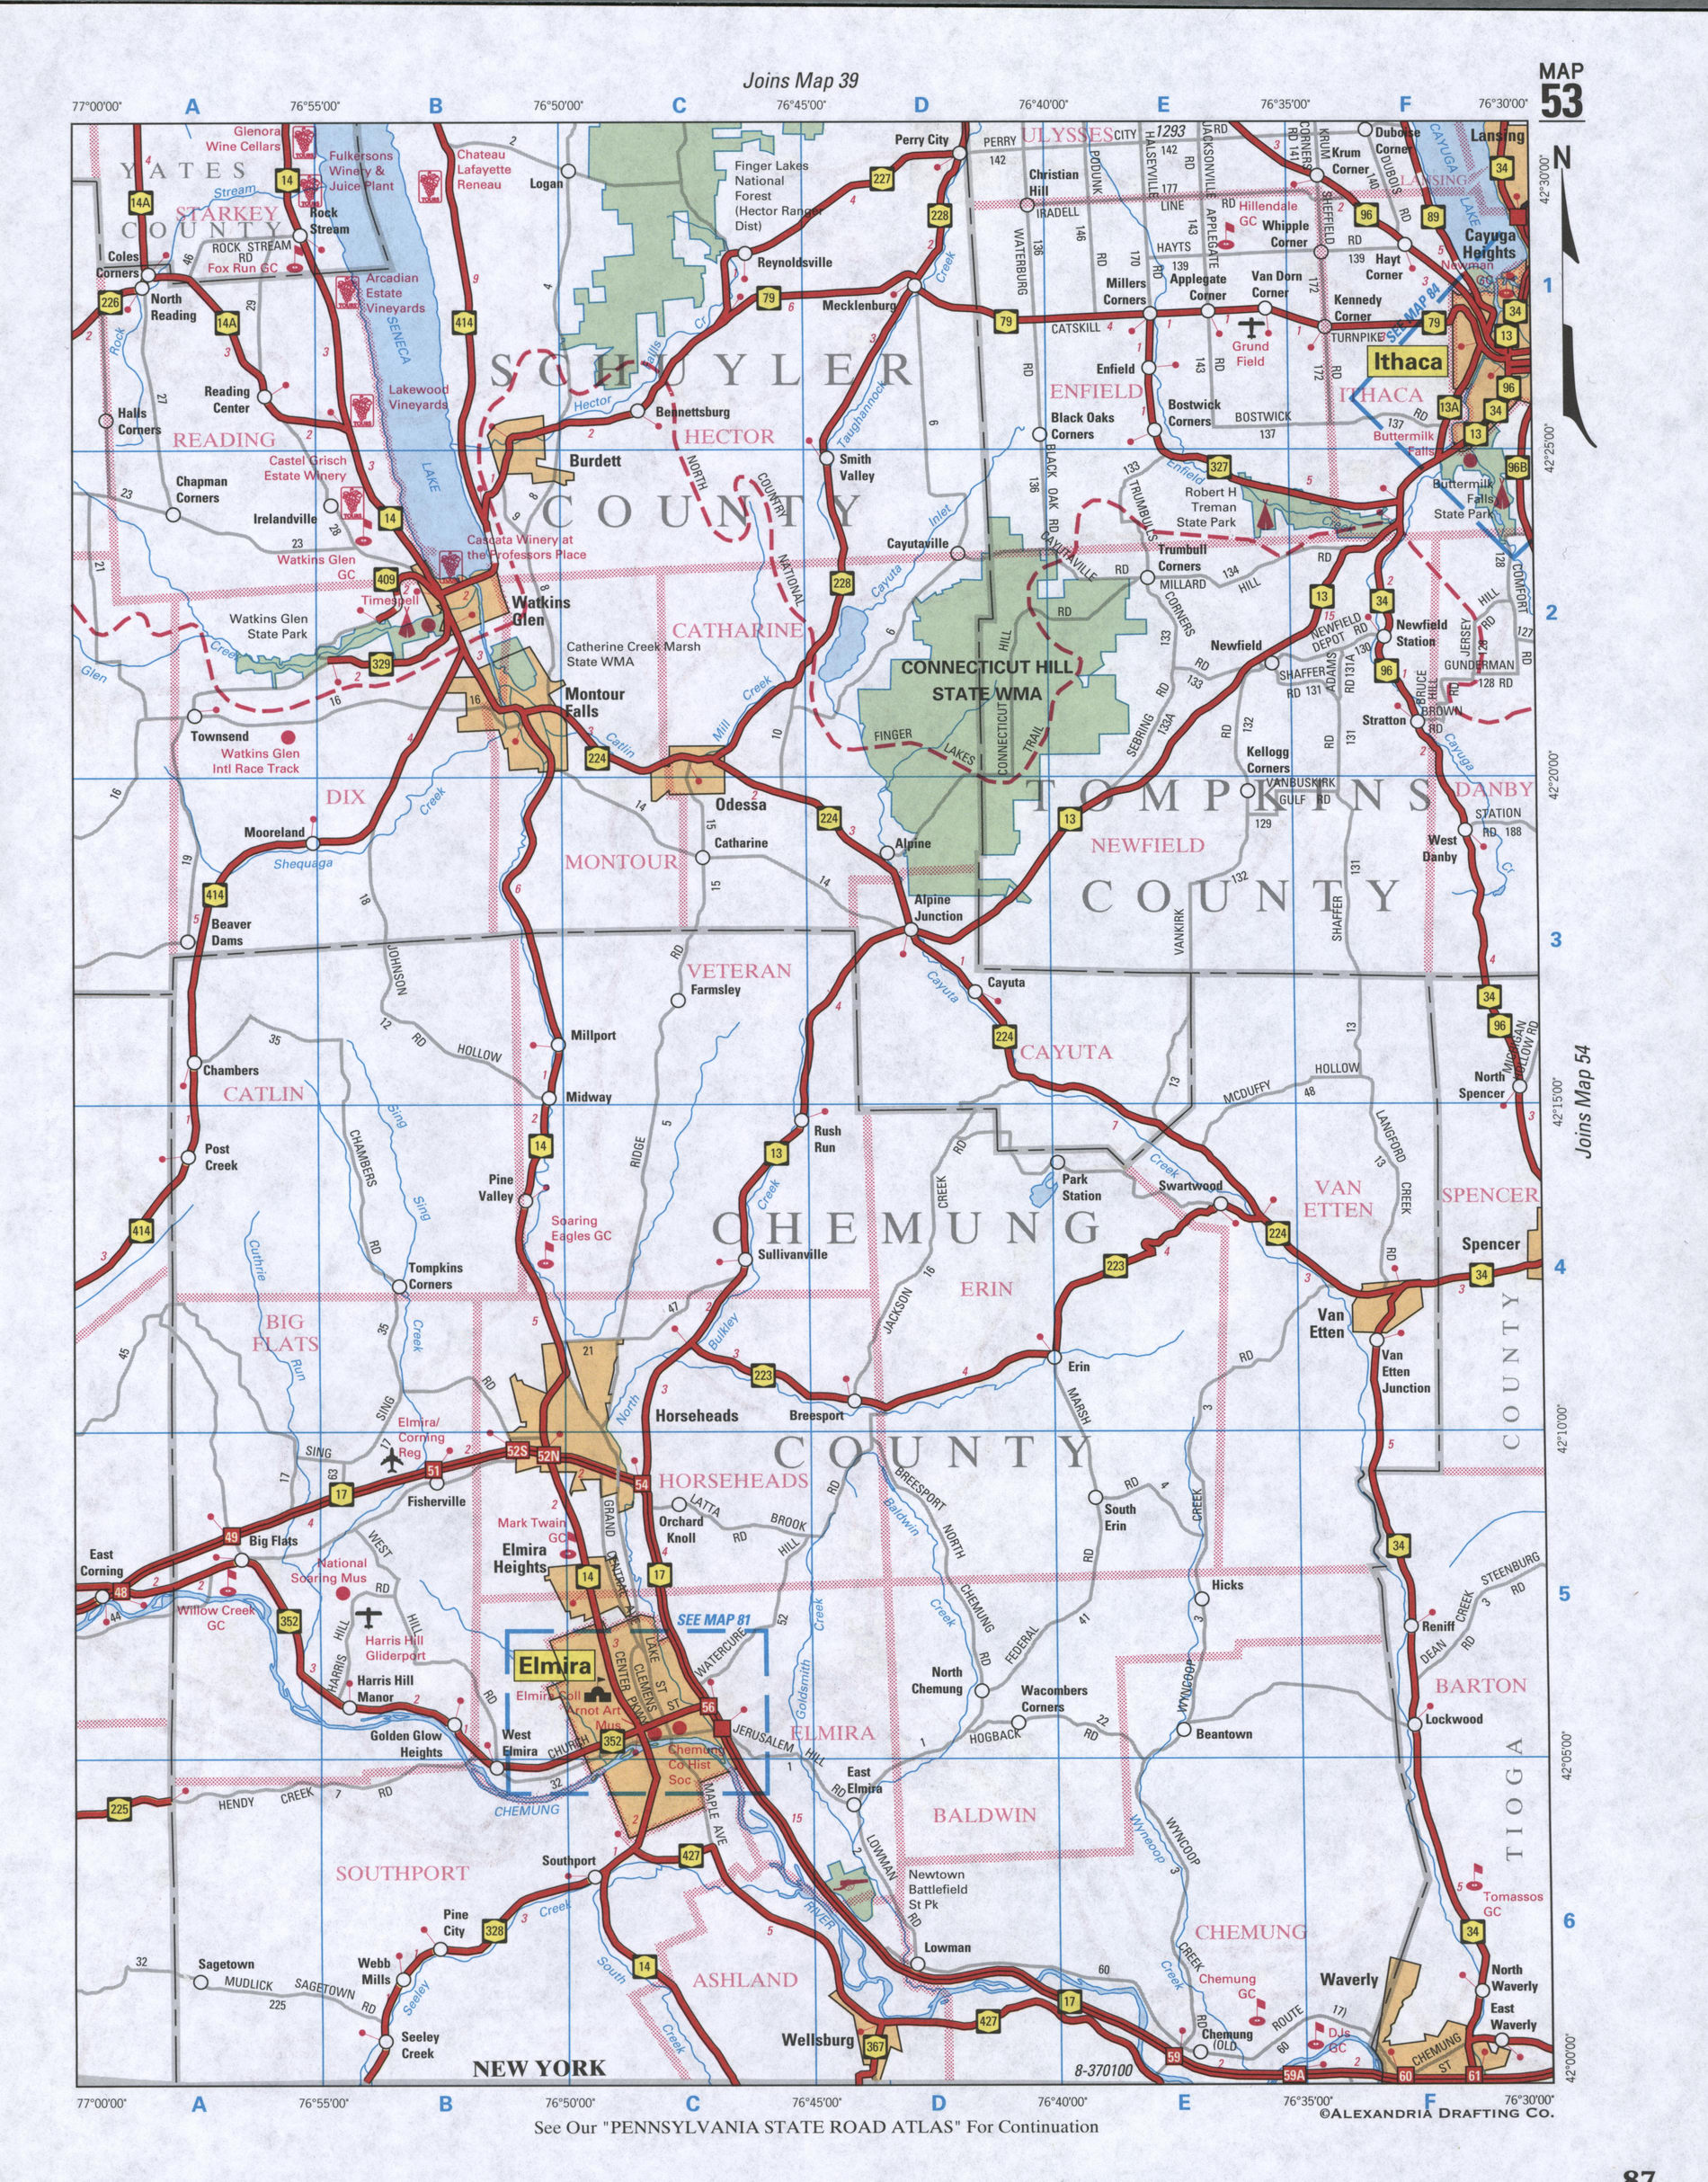 Map of Tompkins County, New York state